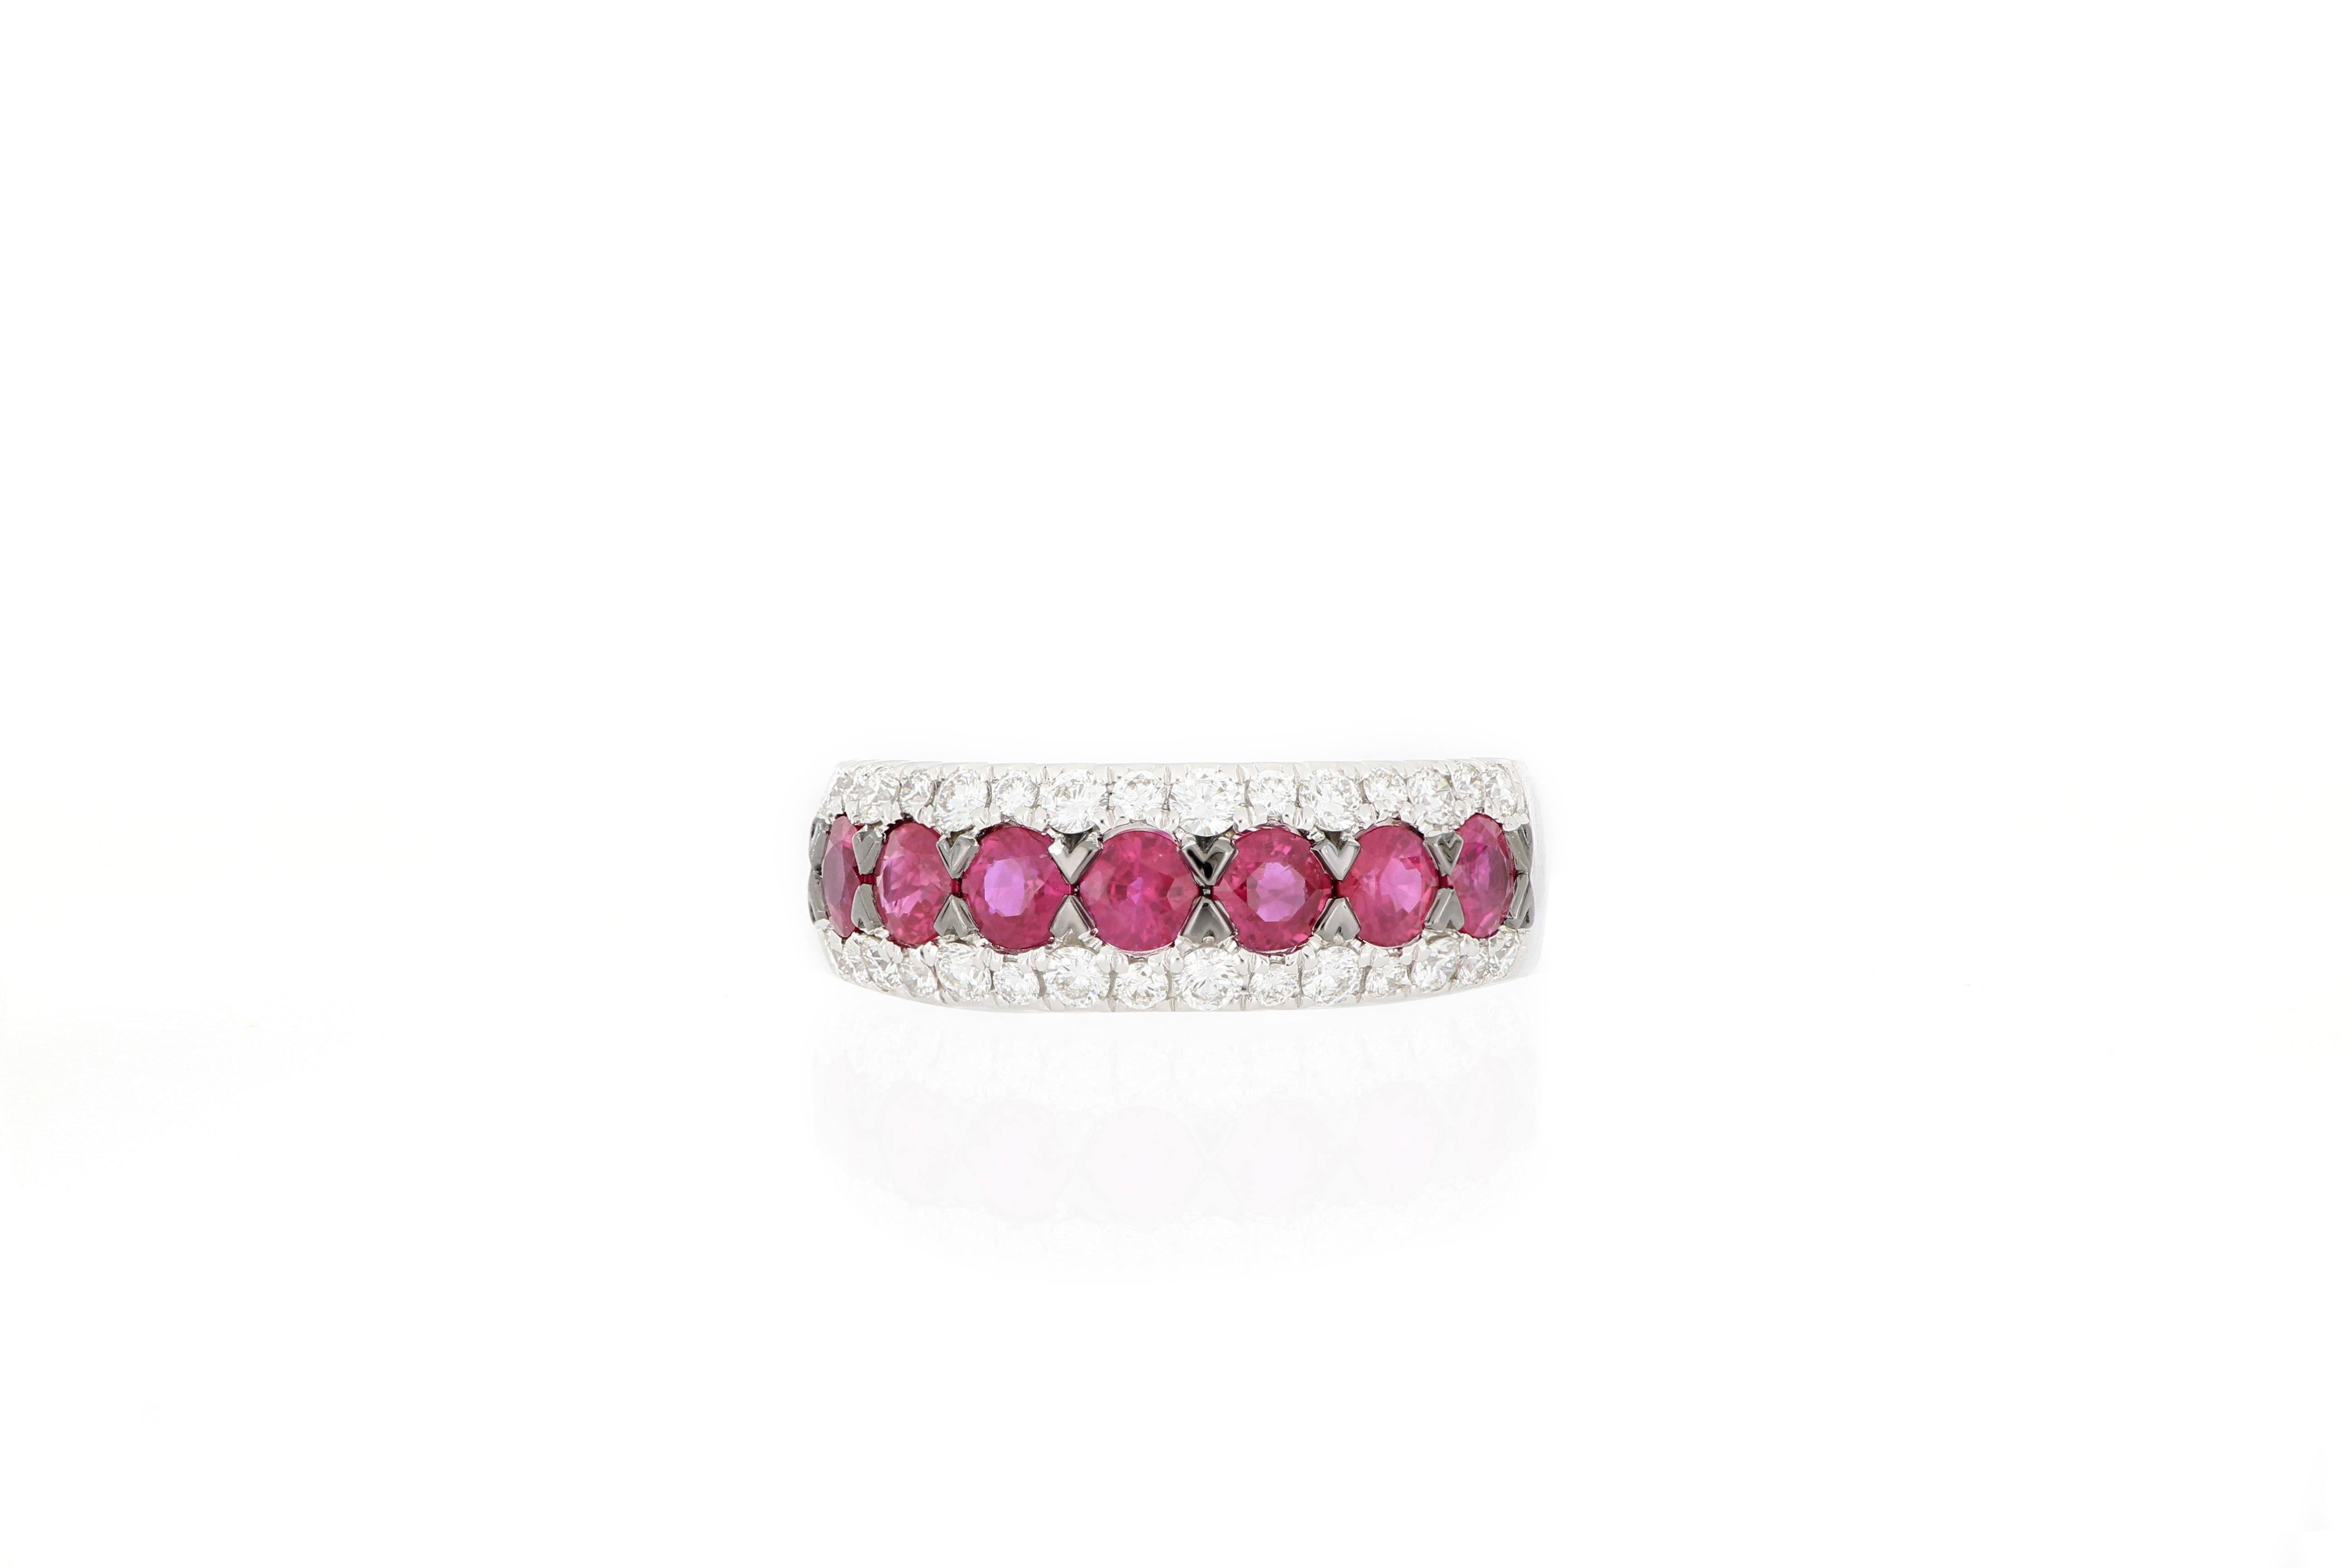 A  ruby and diamond ring, set with natural ruby weighing 1.57cts and brilliant-cut diamonds totaling 0.61cts on the sides, mounted in 18 karat white gold. A classic and elegant ring which can be worn on every occasion.  
O’Che 1867 is renowned for